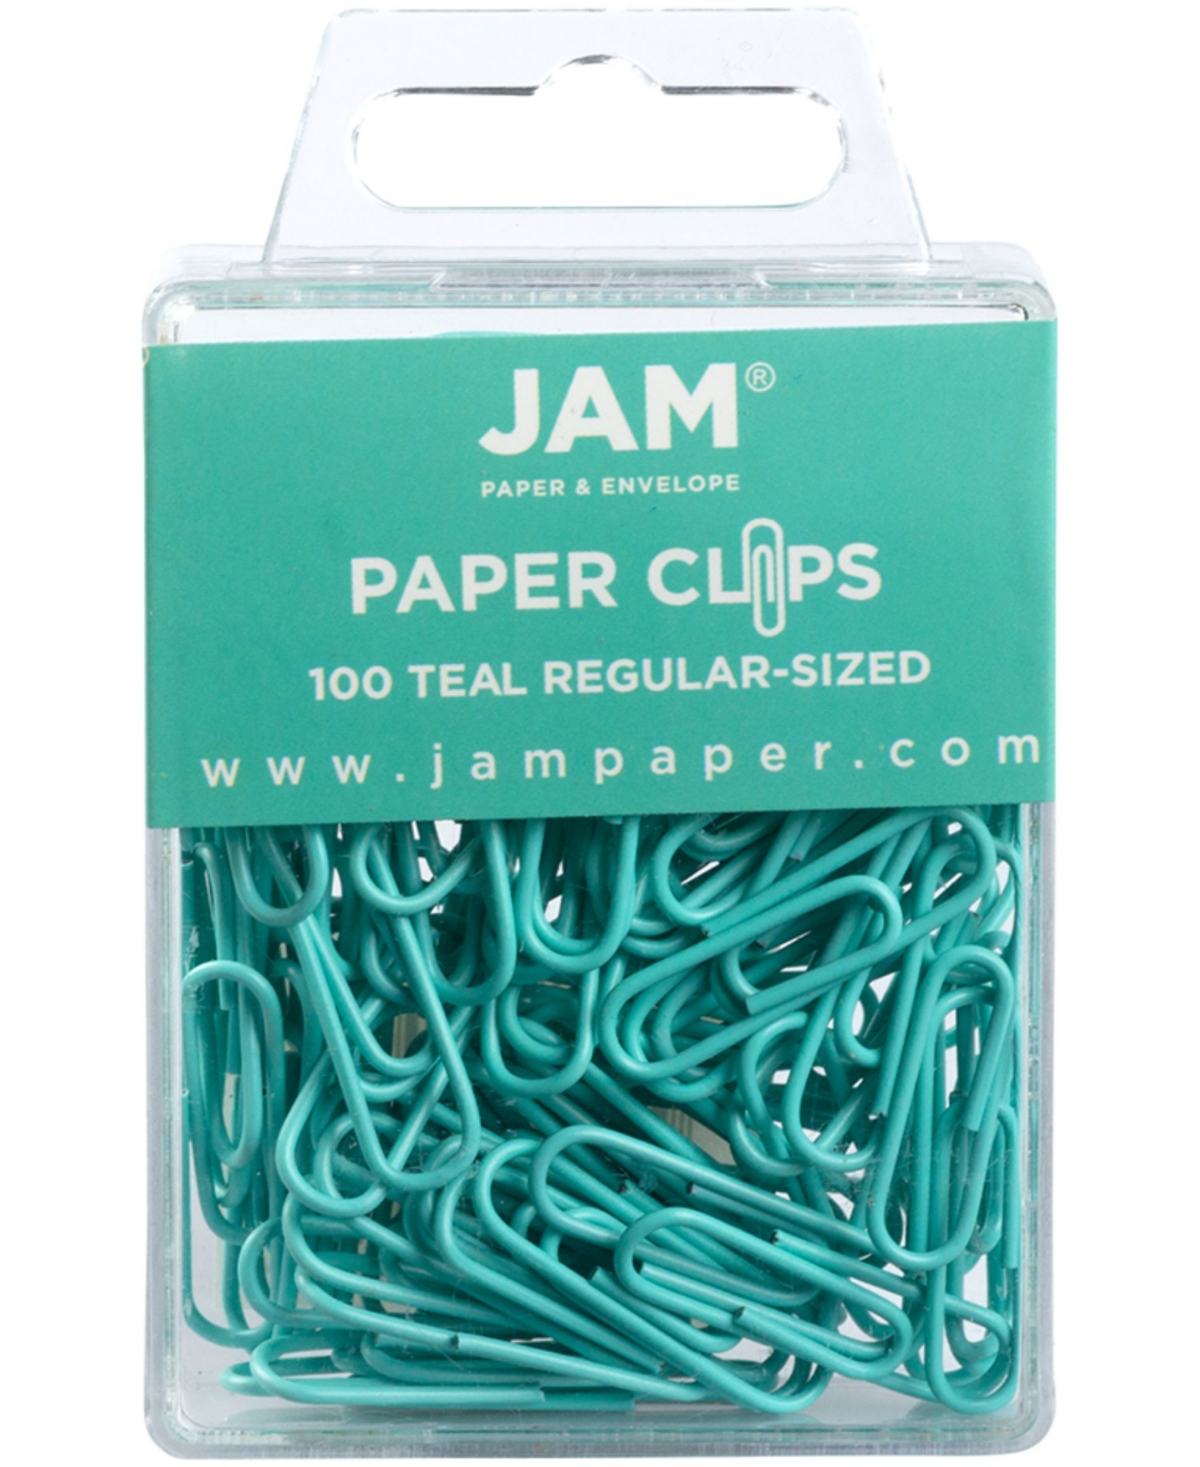 Colorful Standard Paper Clips - Regular 1" - Paperclips - 100 Per Pack - Teal